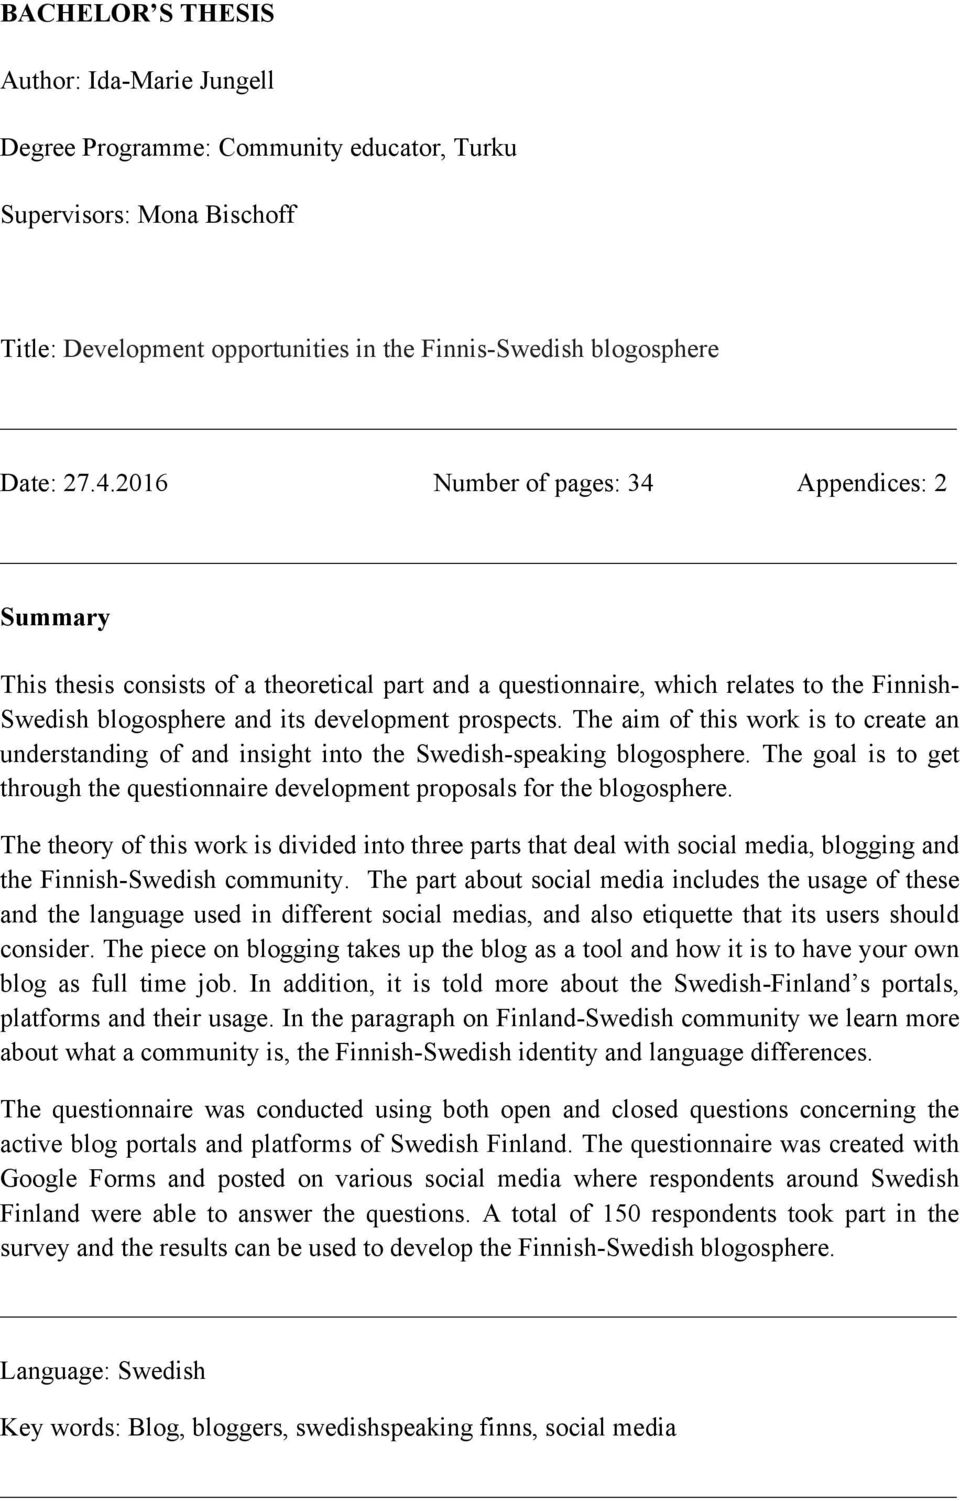 The aim of this work is to create an understanding of and insight into the Swedish-speaking blogosphere. The goal is to get through the questionnaire development proposals for the blogosphere.